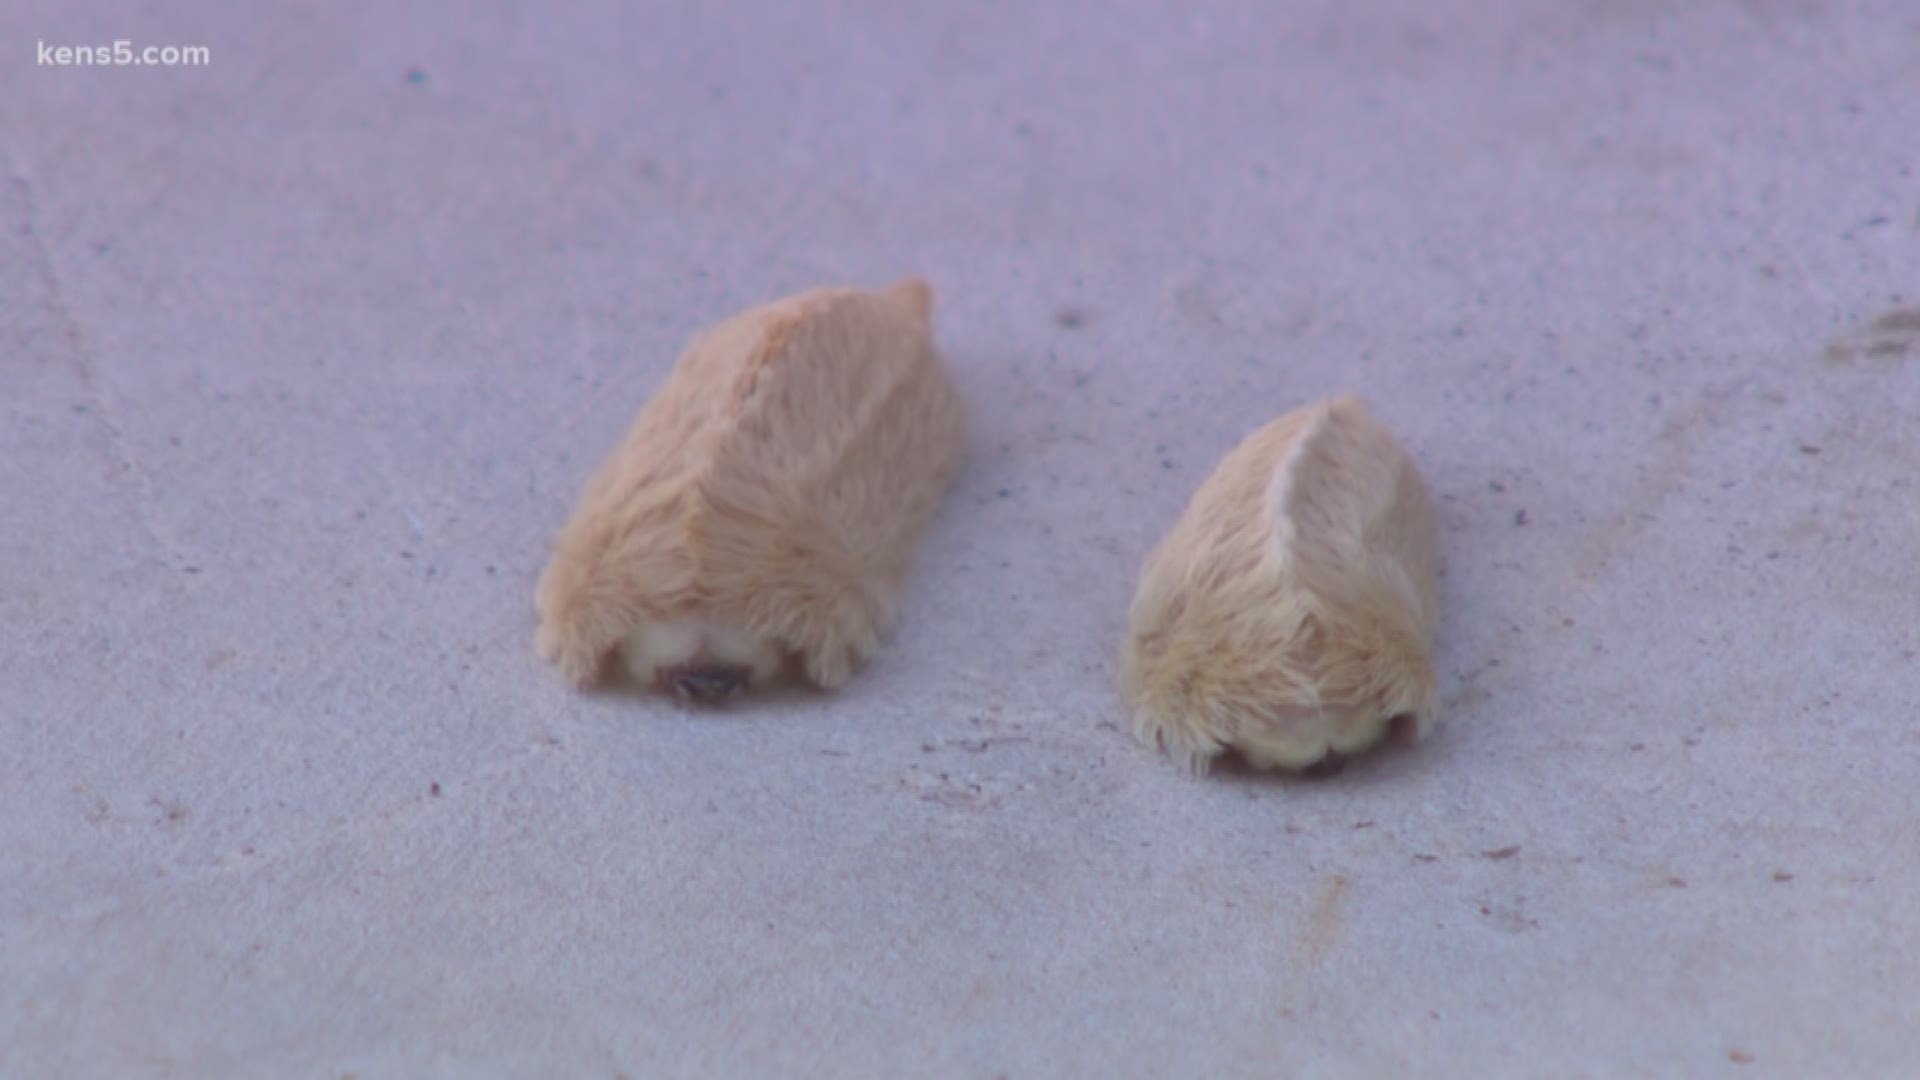 The fluffy caterpillars seen around San Antonio may look cute and harmless but keep your distance. They're venomous and are harmful to everyone.